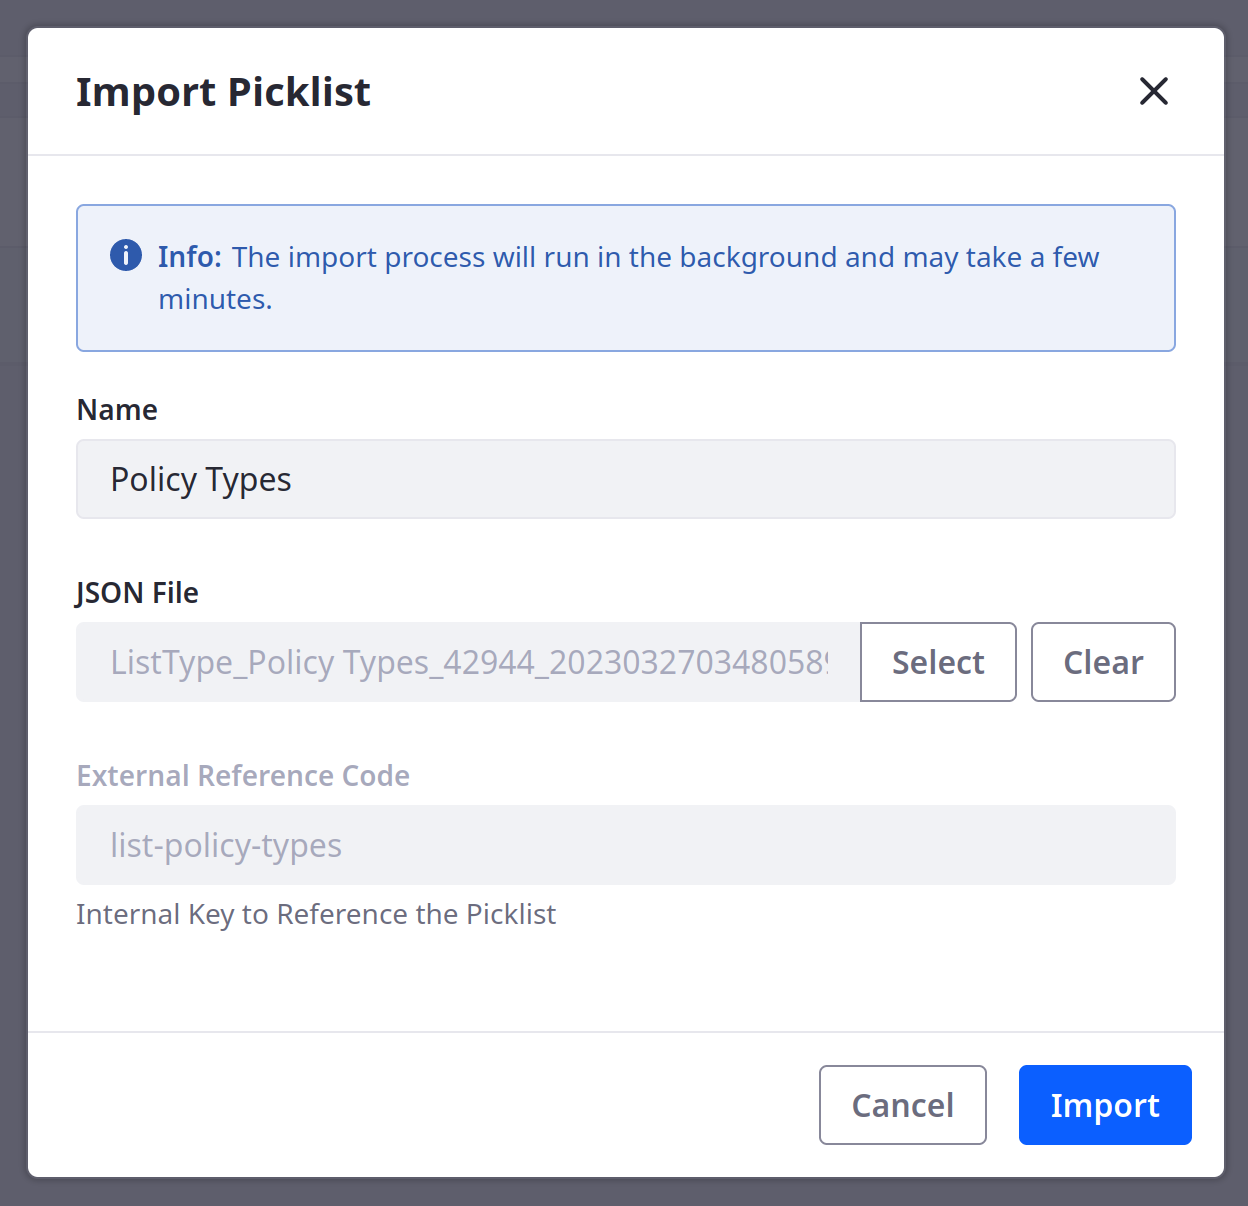 Enter a name for the list and select a picklist to import.